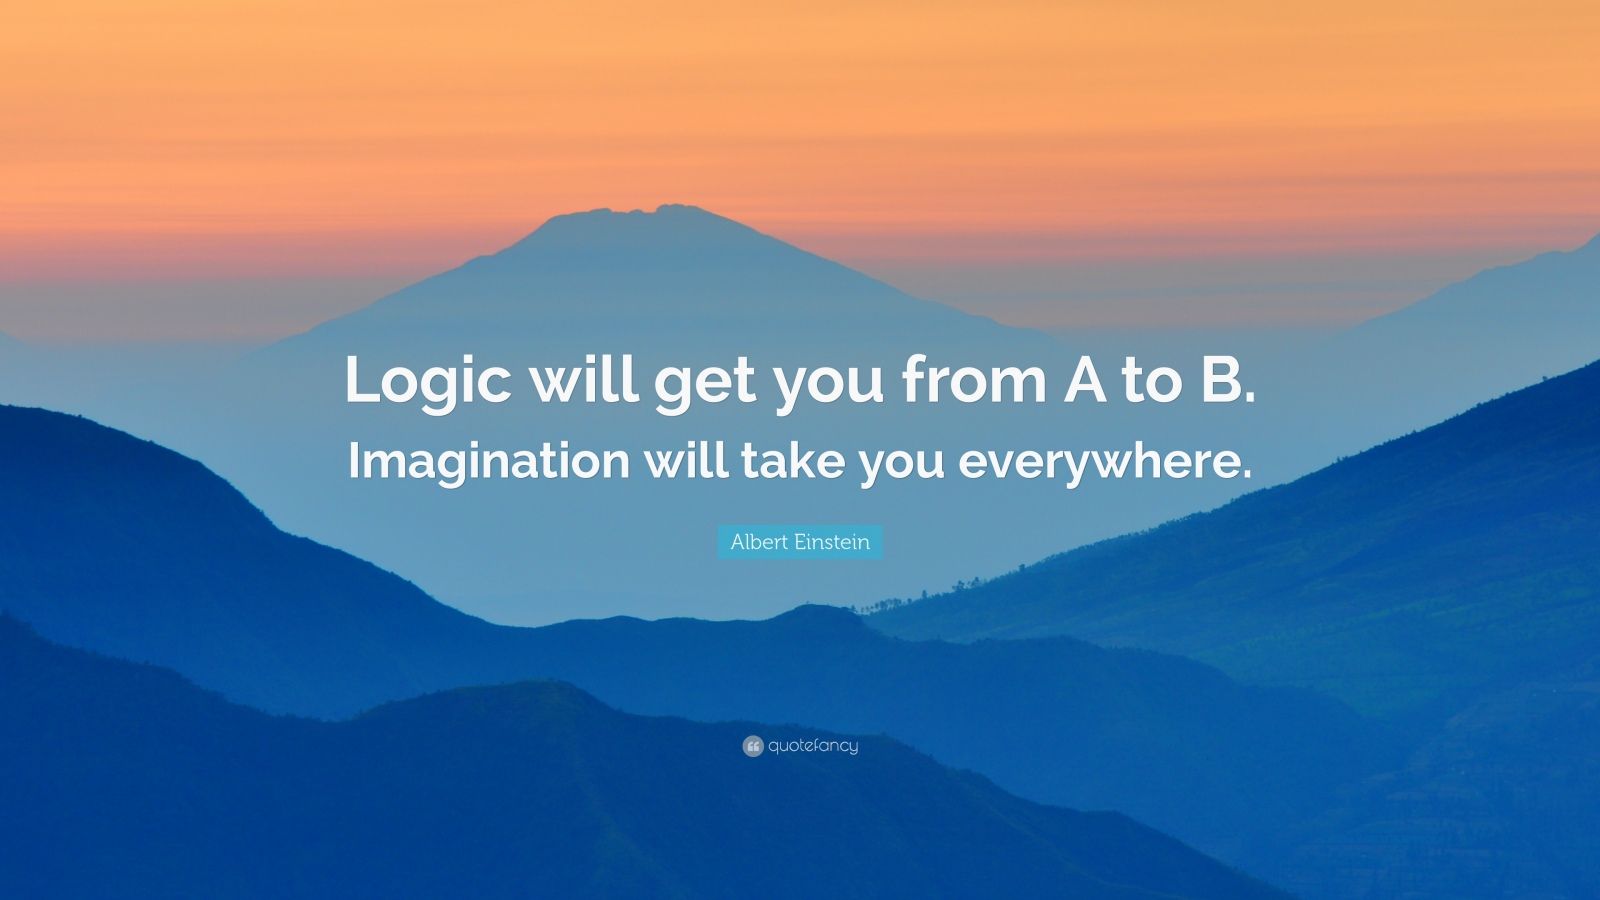 Albert Einstein Quote: “Logic will get you from A to B. Imagination